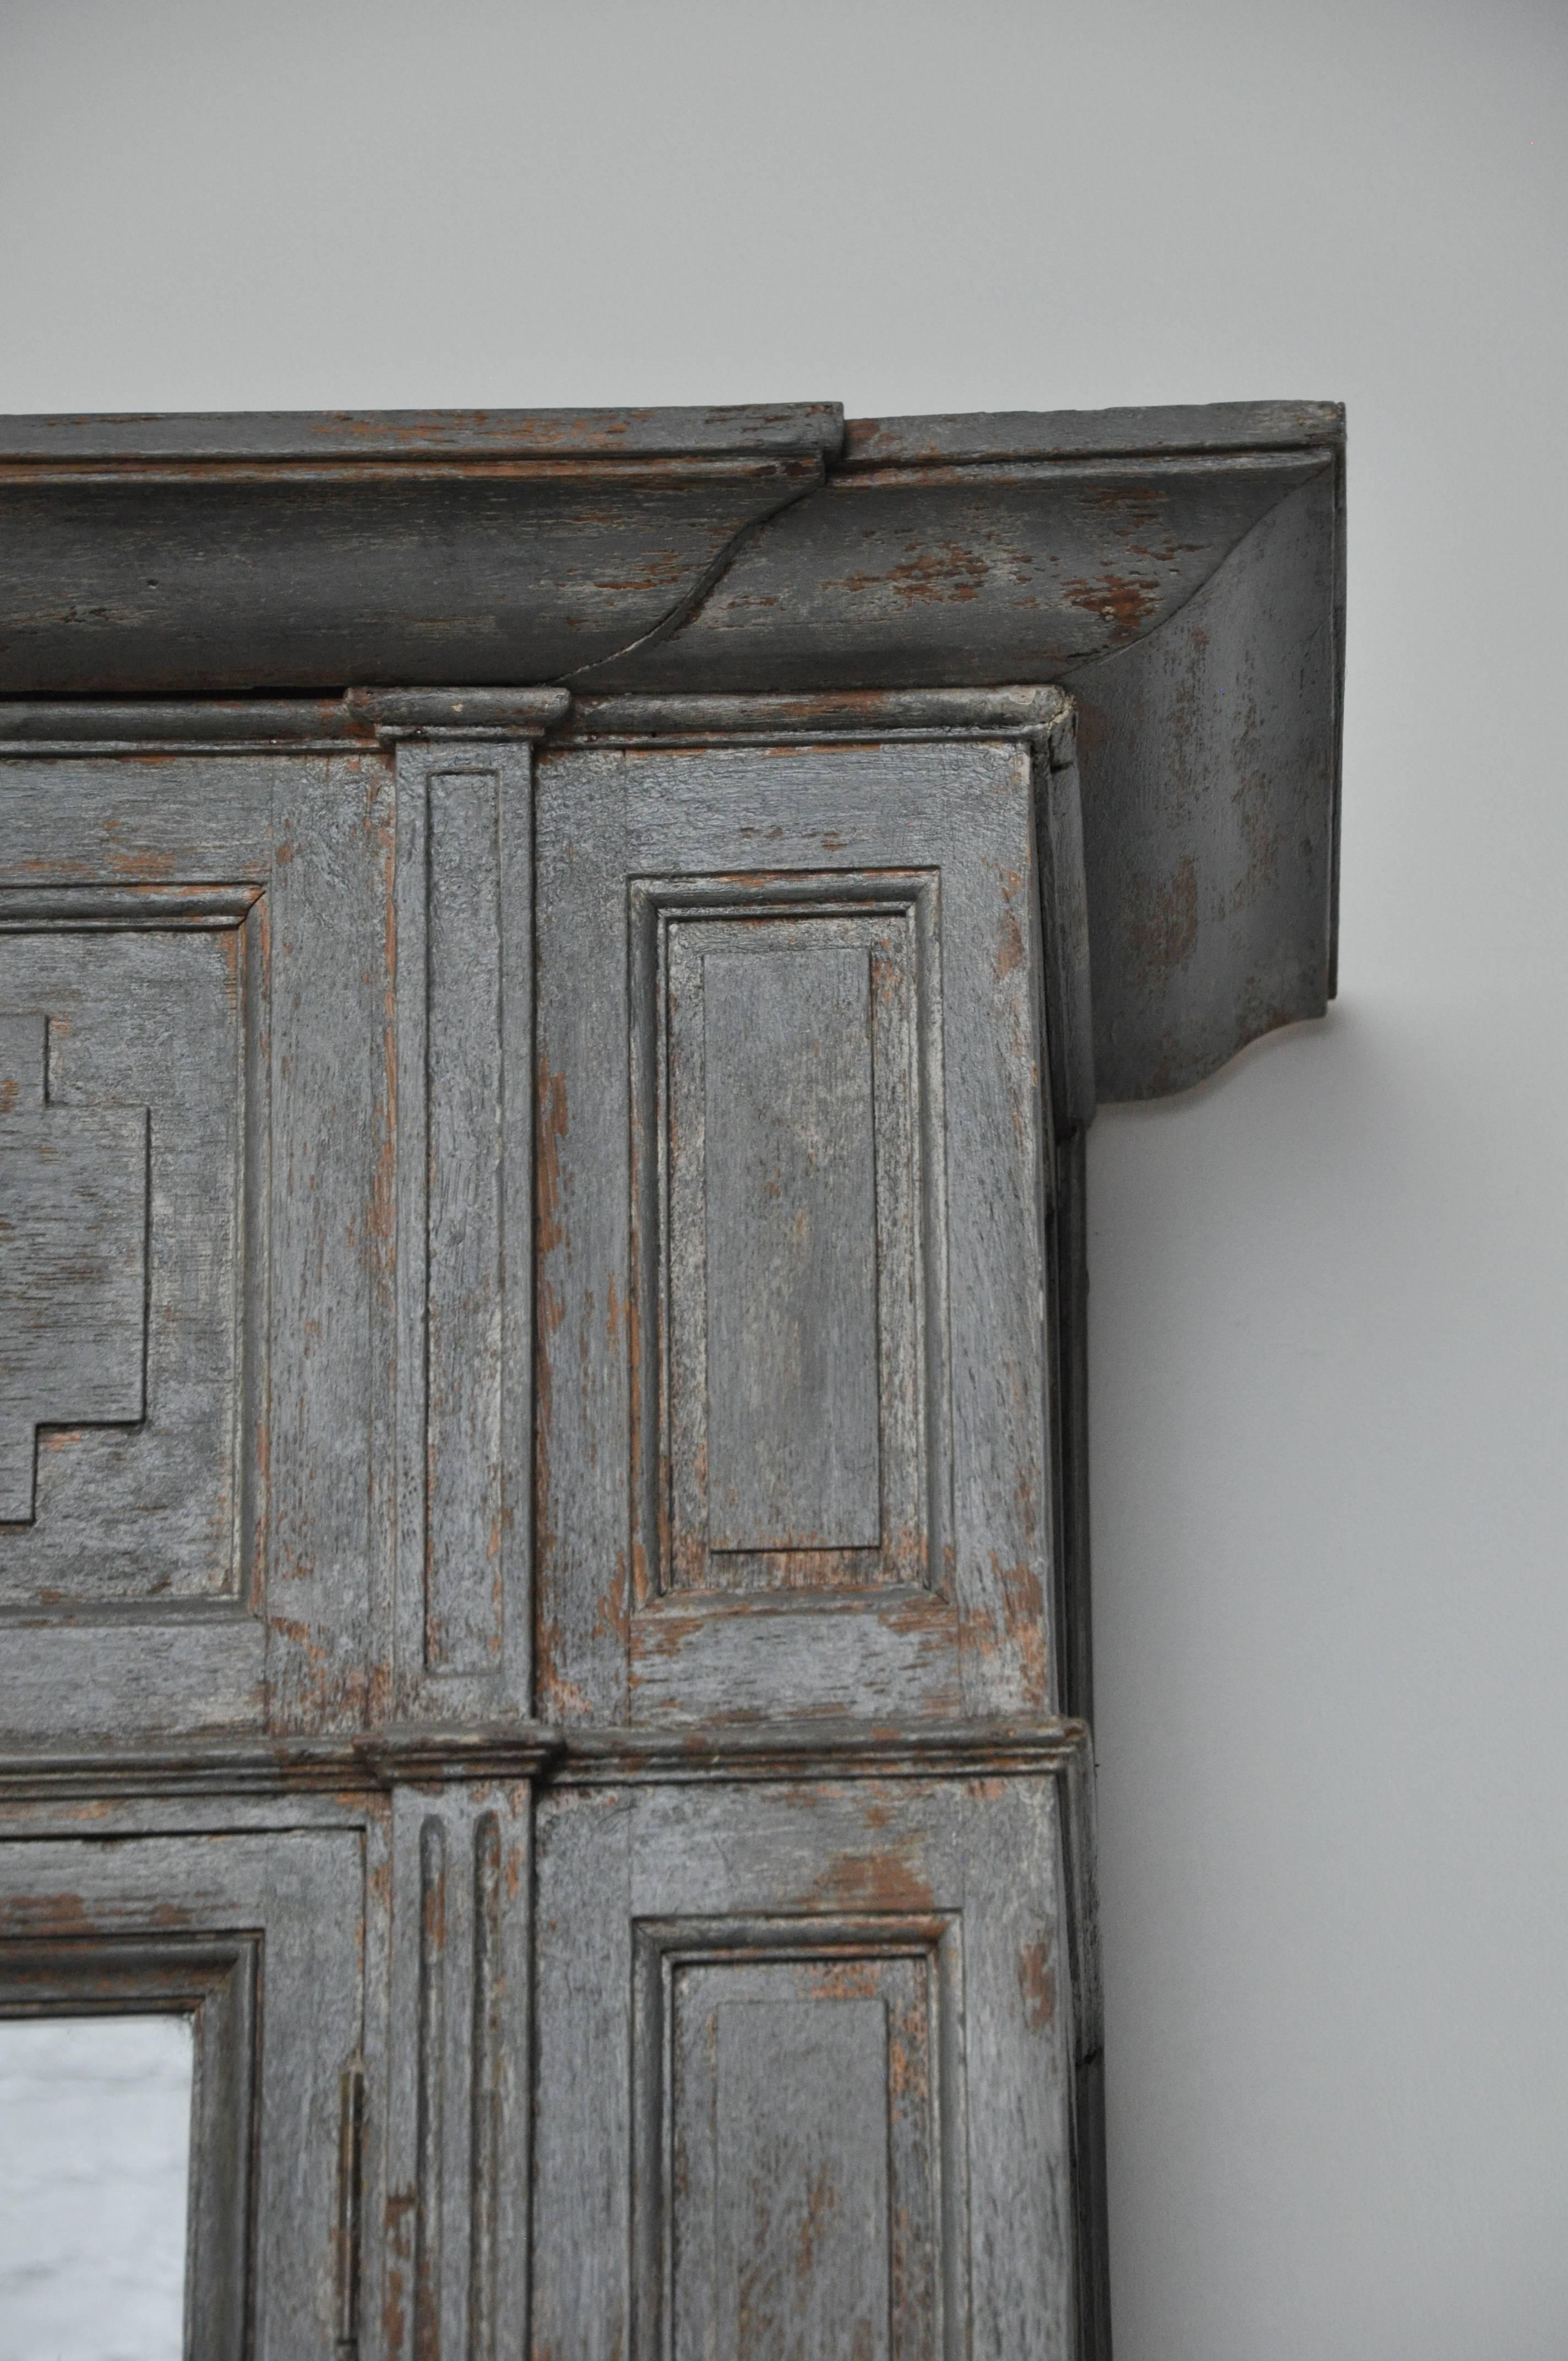 Early 19th Century Extra Tall French Painted Gray CabinetFound in the South of France. 
This piece has significant presence given the height although, not terribly wide or deep, allowing this to fit into a narrow hall, smaller bedroom or any living